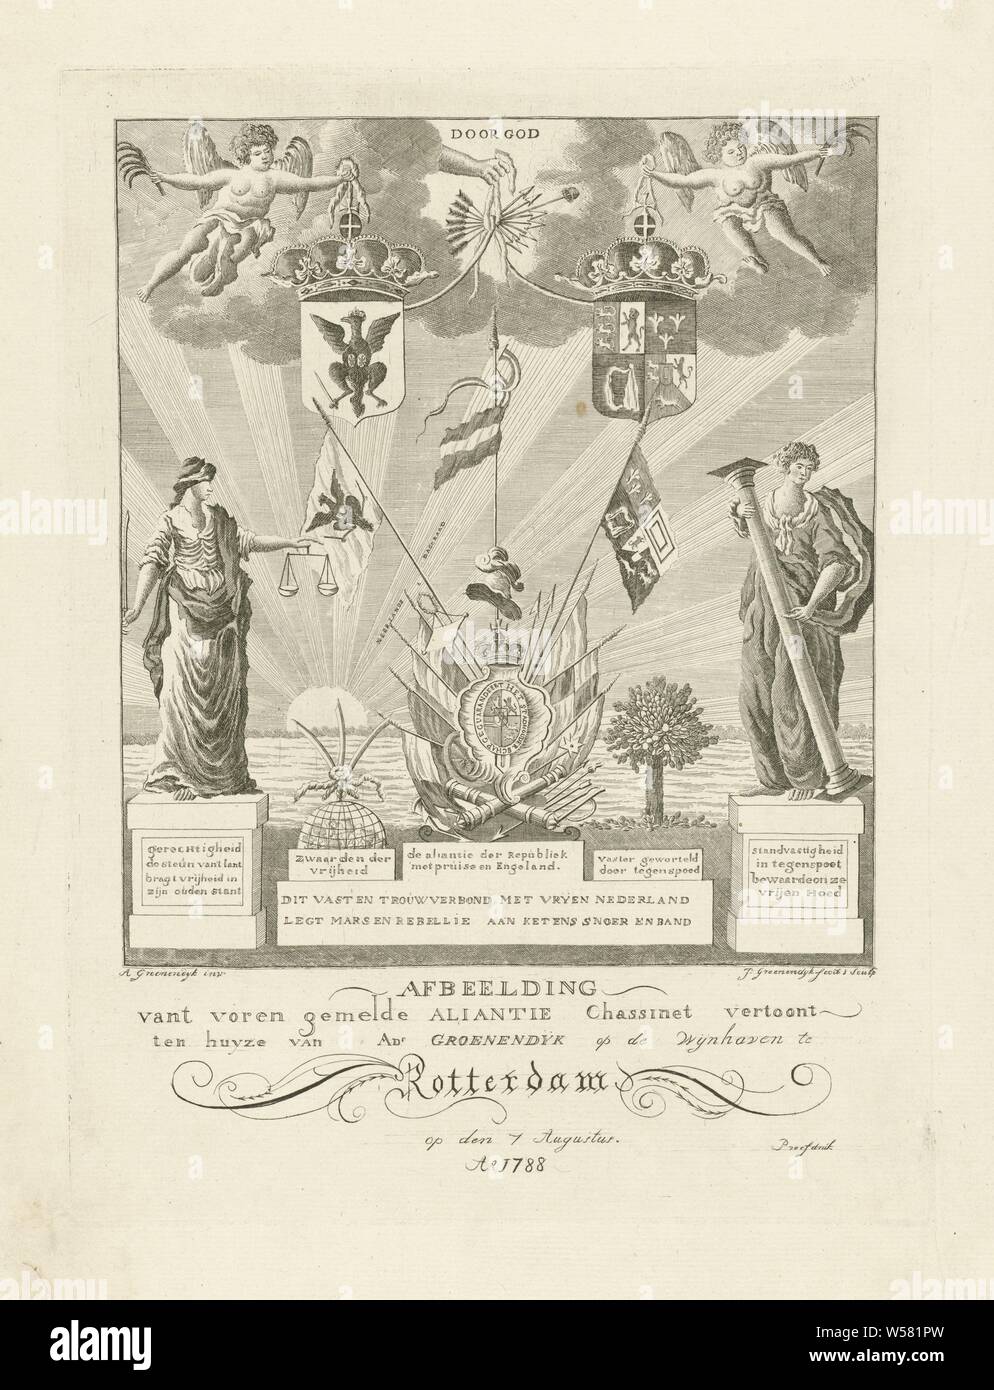 Allegory of the Triple Alliance between the Republic of the Seven United Provinces, Prussia and the United Kingdom, 1788 Depiction of the aforementioned aliance chassinet shows (title on object), Allegory of the Triple Alliance from 1788 in rebus form. In the center the coat of arms of the Republic of the Seven United Provinces. Above it the coats of arms of Prussia (left) and the United Kingdom (right), held up by angels and by the hand of God. In addition to the coats of arms three swords that are tied together and the personification Justice. On the right a rooted tree and Stock Photo